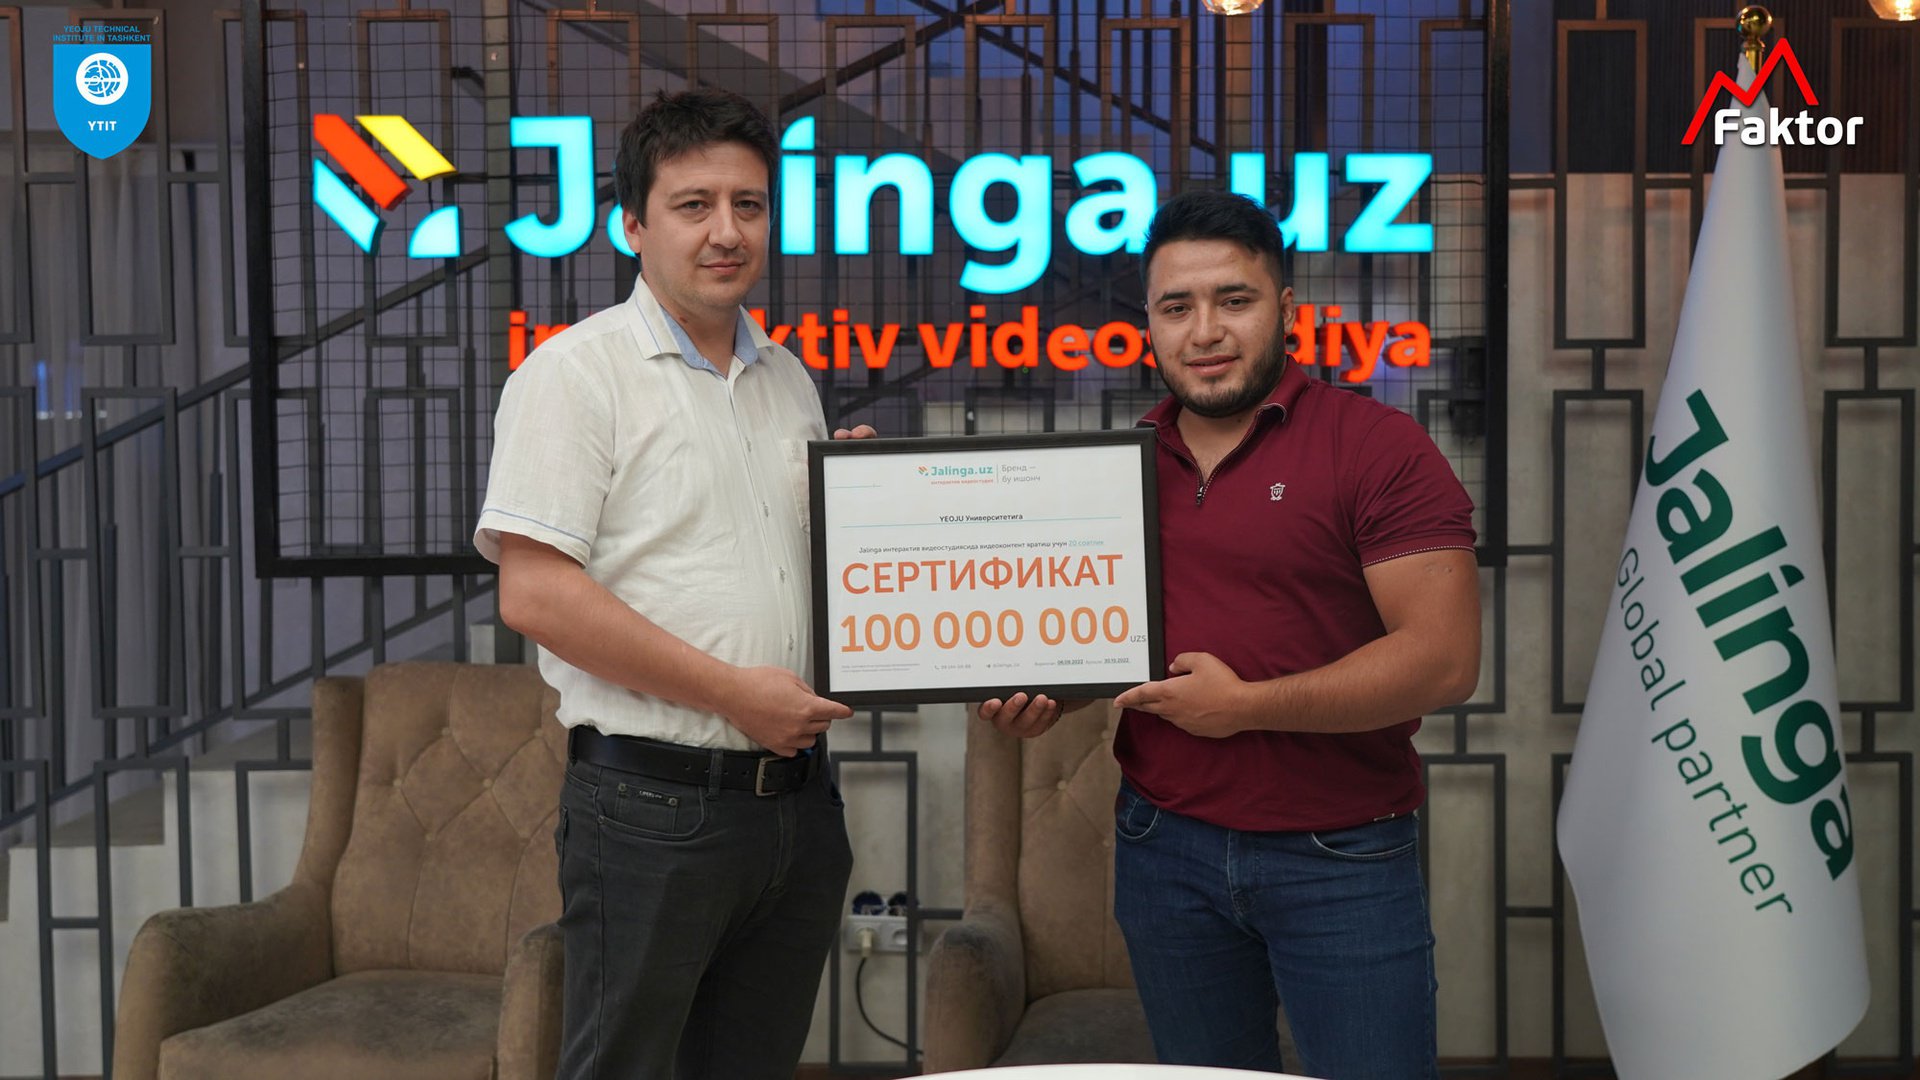 A GRANT OF 100 MILLION WAS AWARDED TO USE THE INTERACTIVE VIDEO STUDIO JALINGA